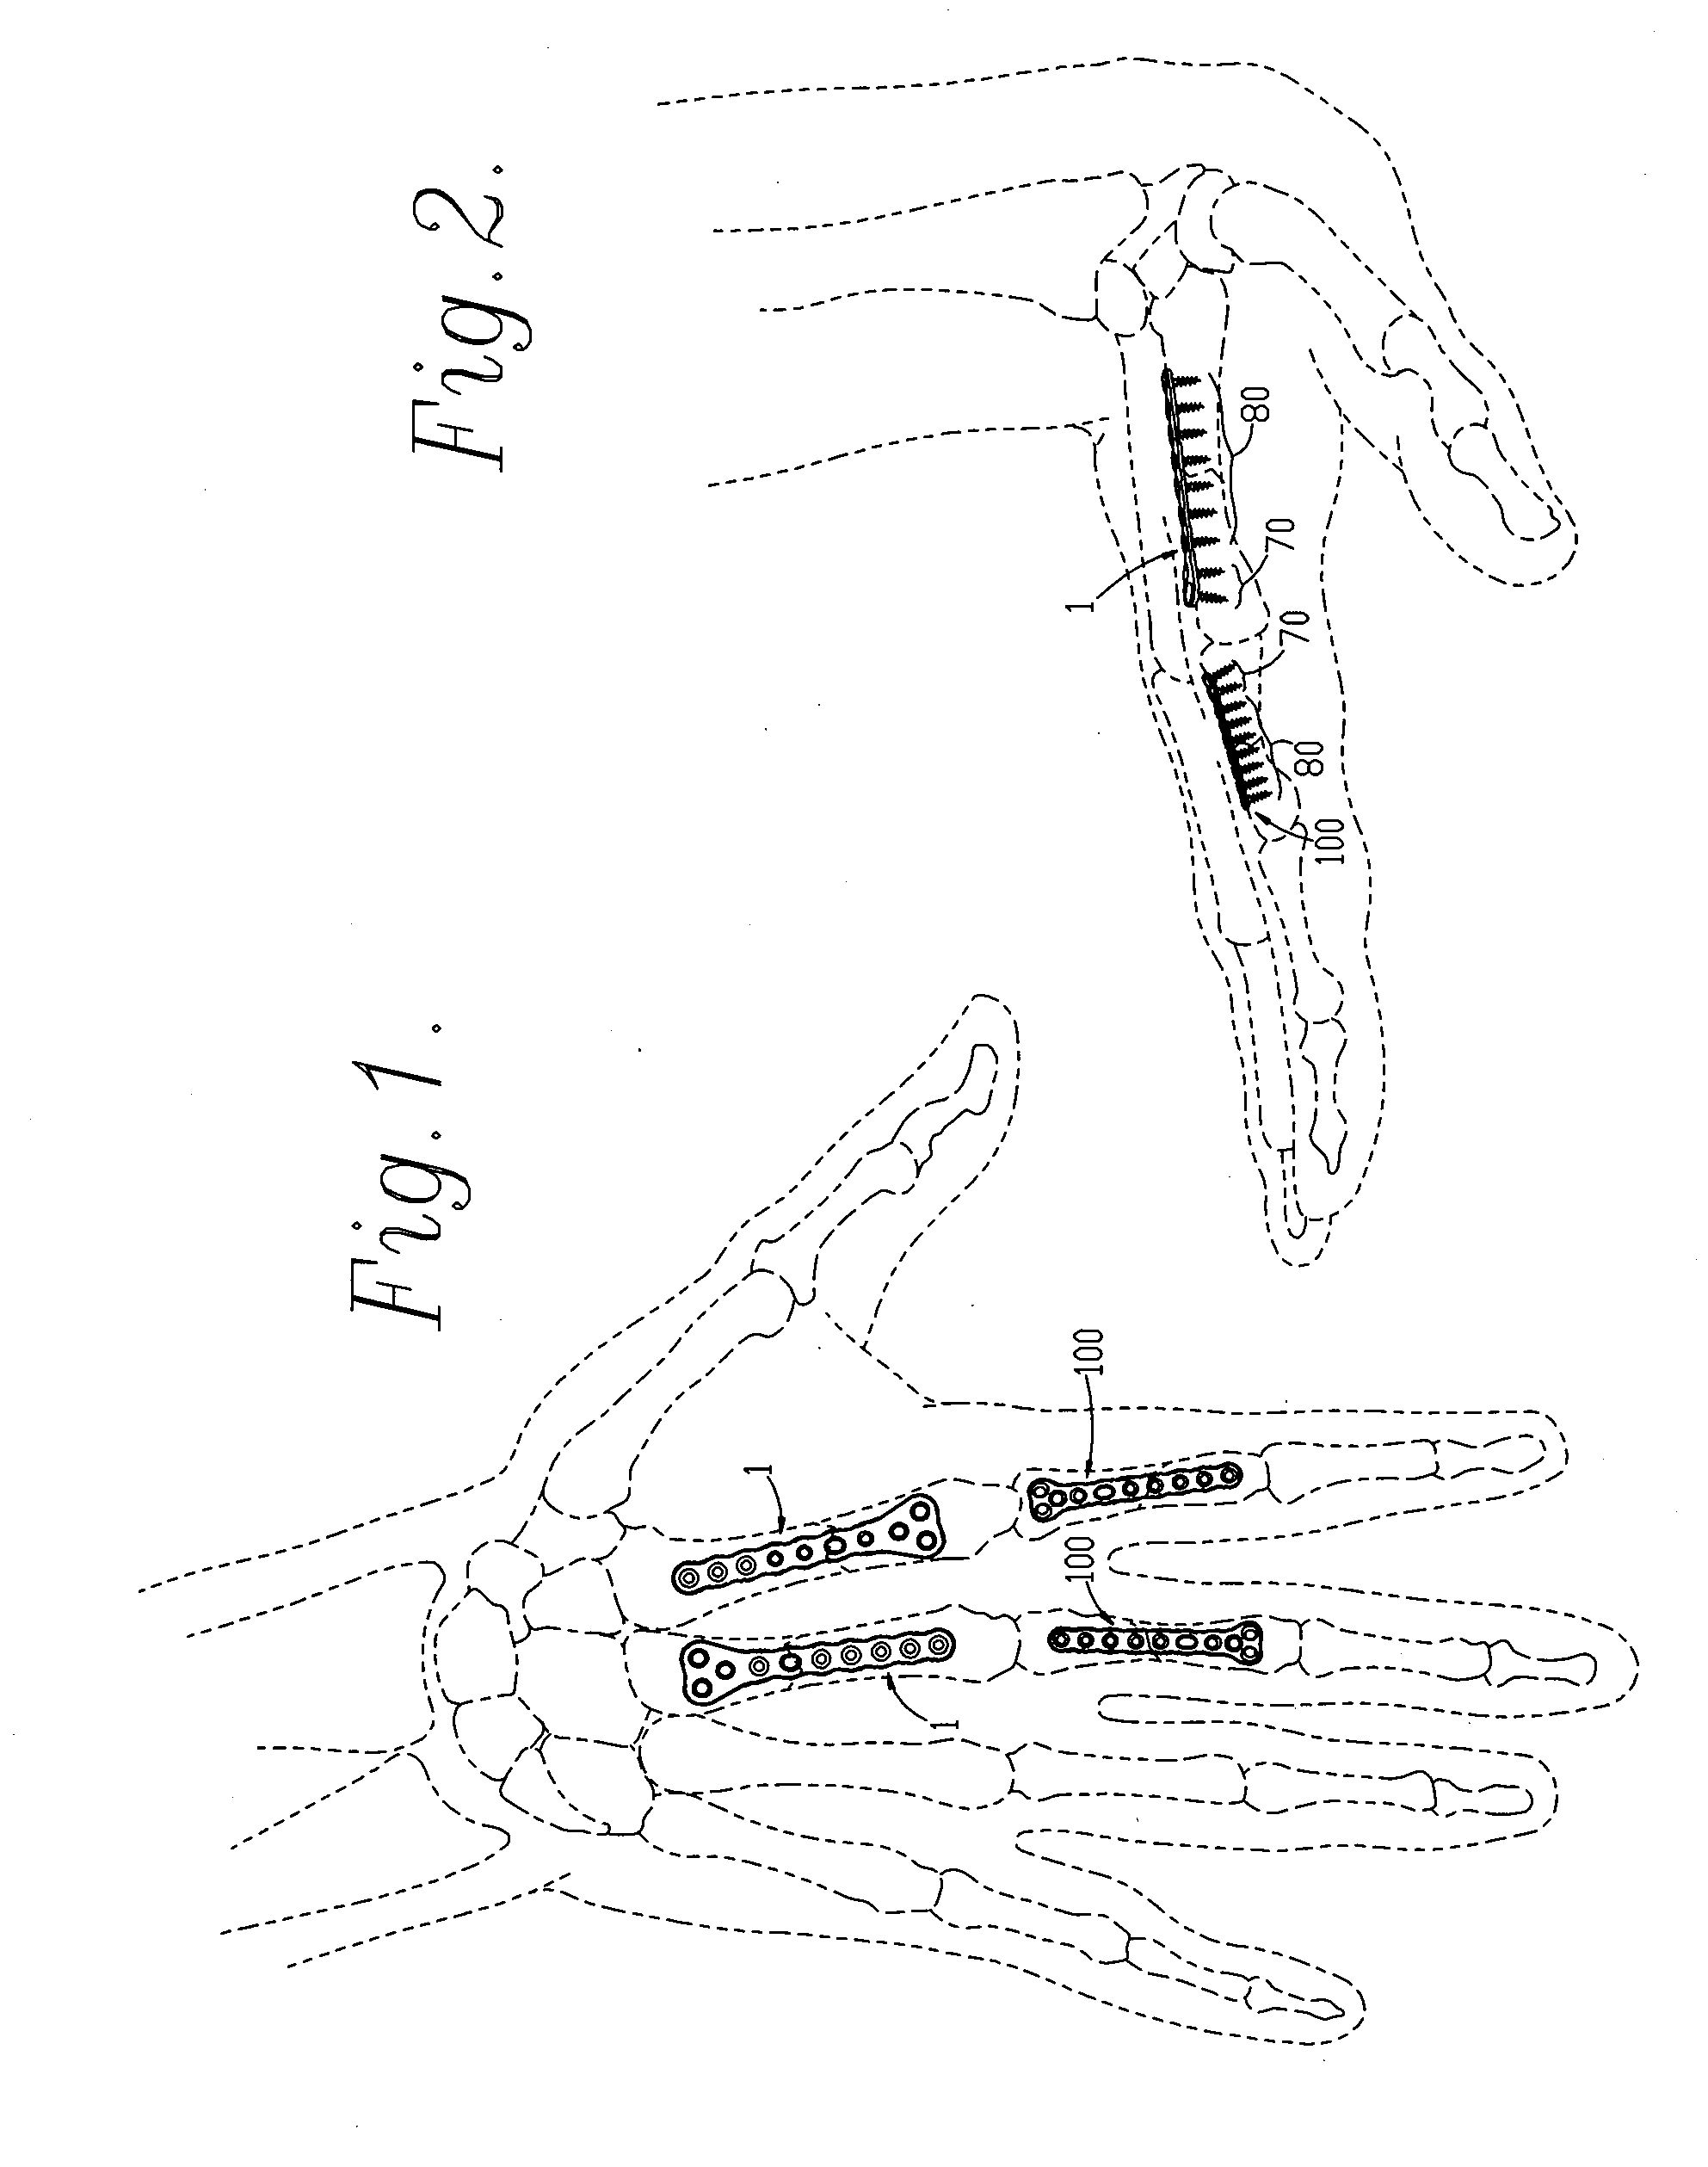 Subcondylar fracture fixation plate system for tubular bones of the hand